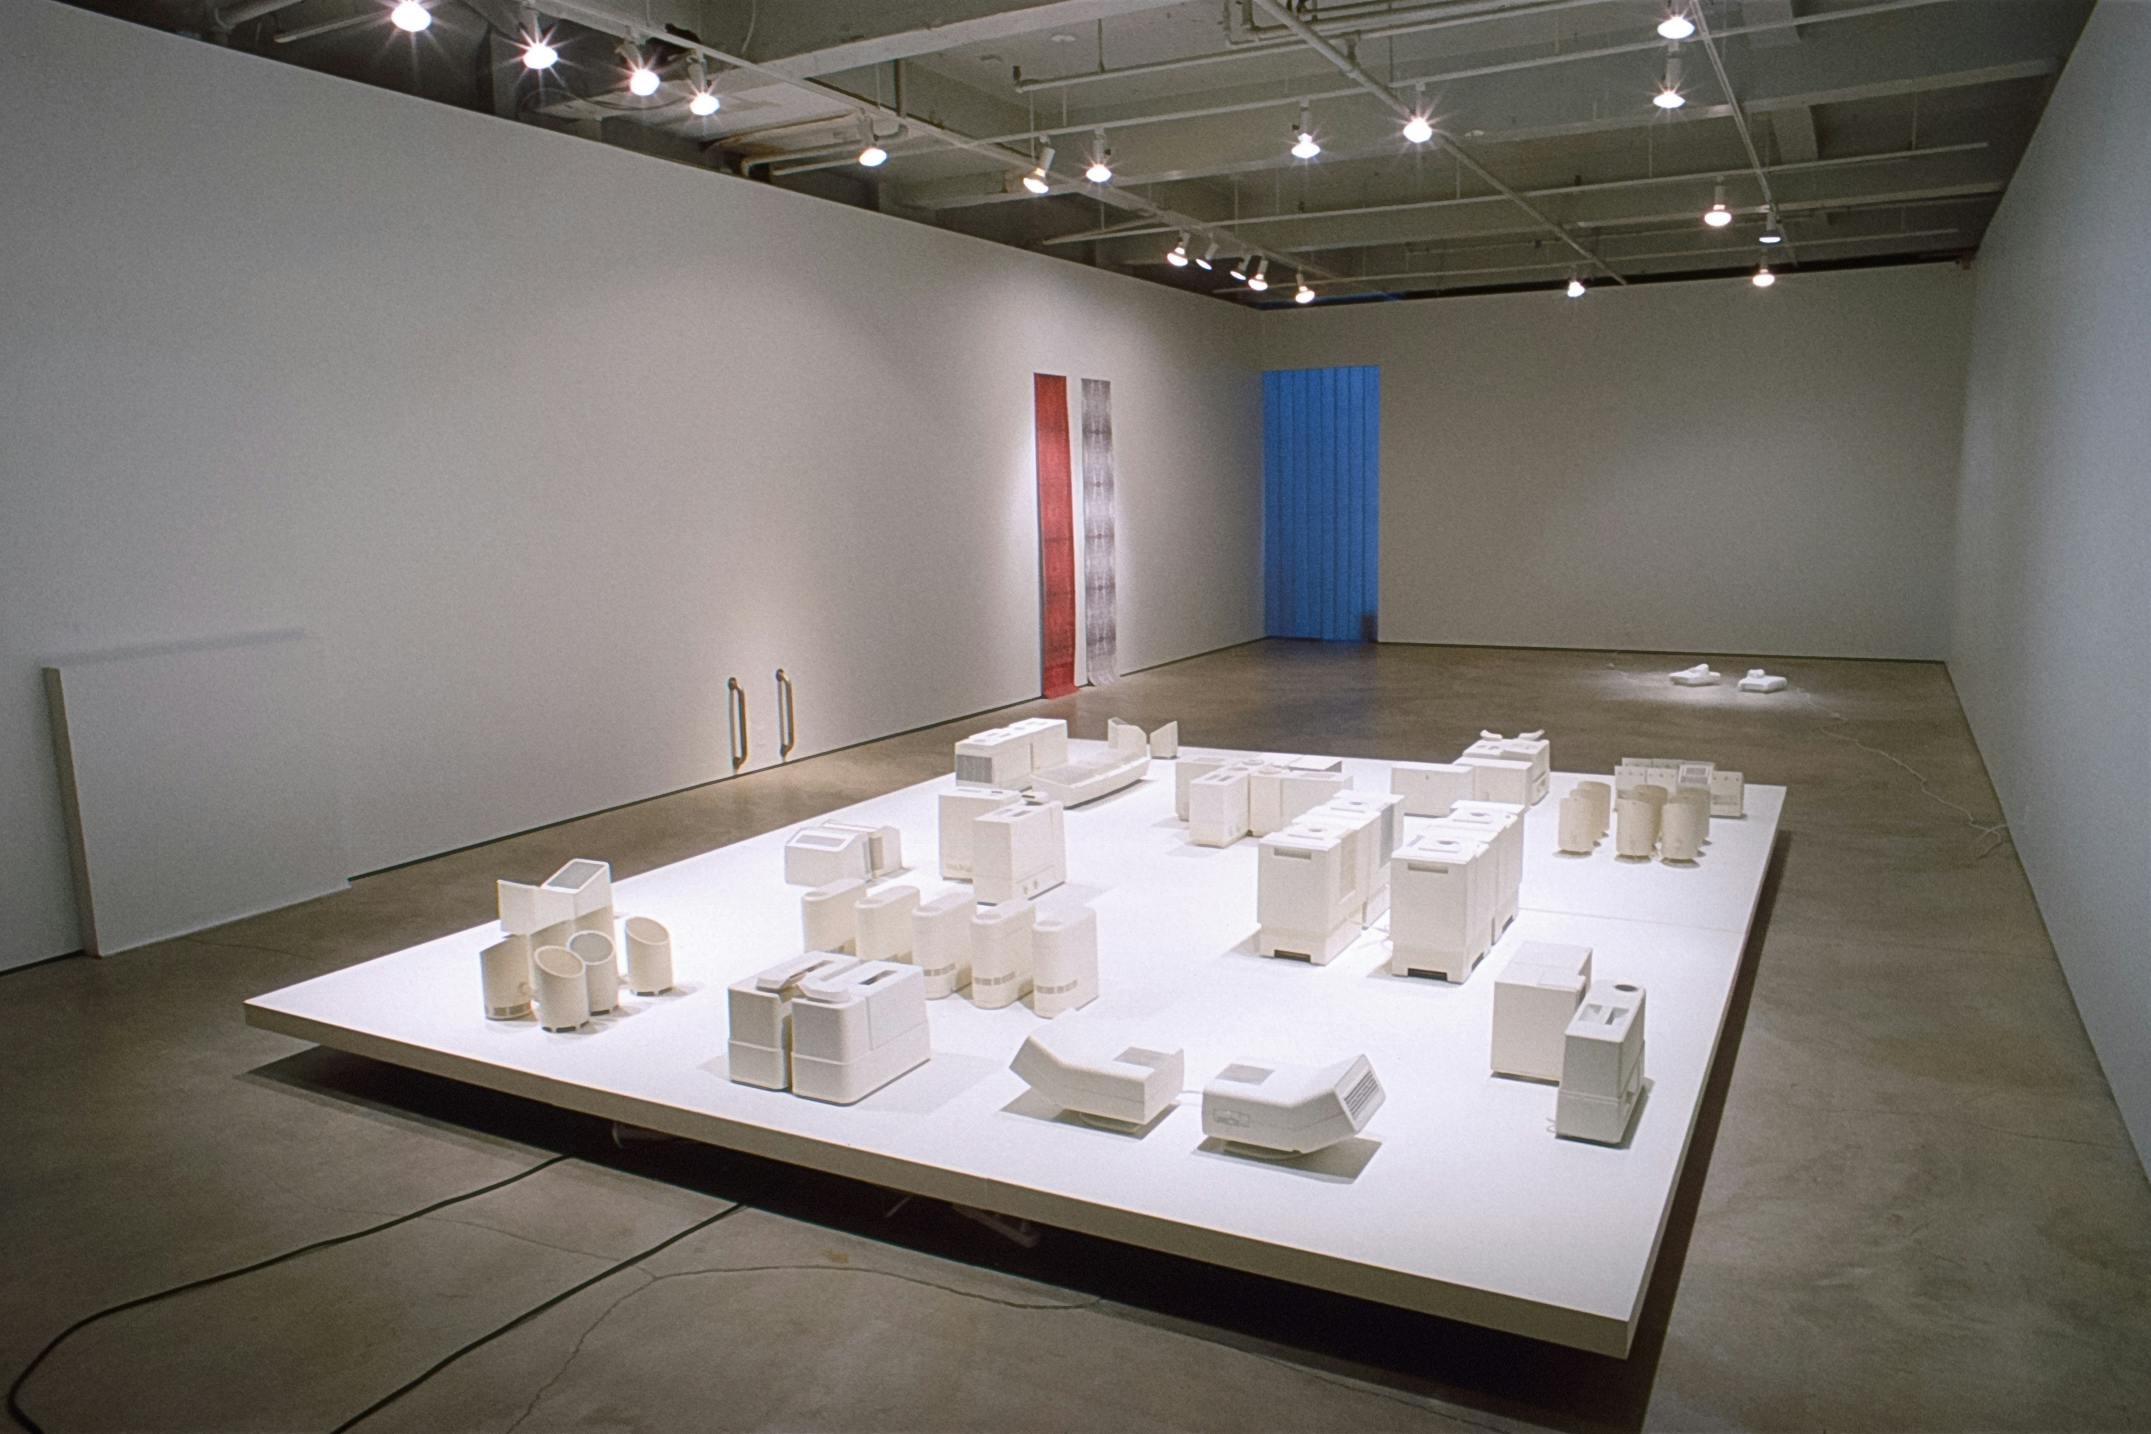 Several artworks are installed in the gallery. White miniatures of electronics are installed on the floor. A pair of red and white scrolls are installed on the back wall. 